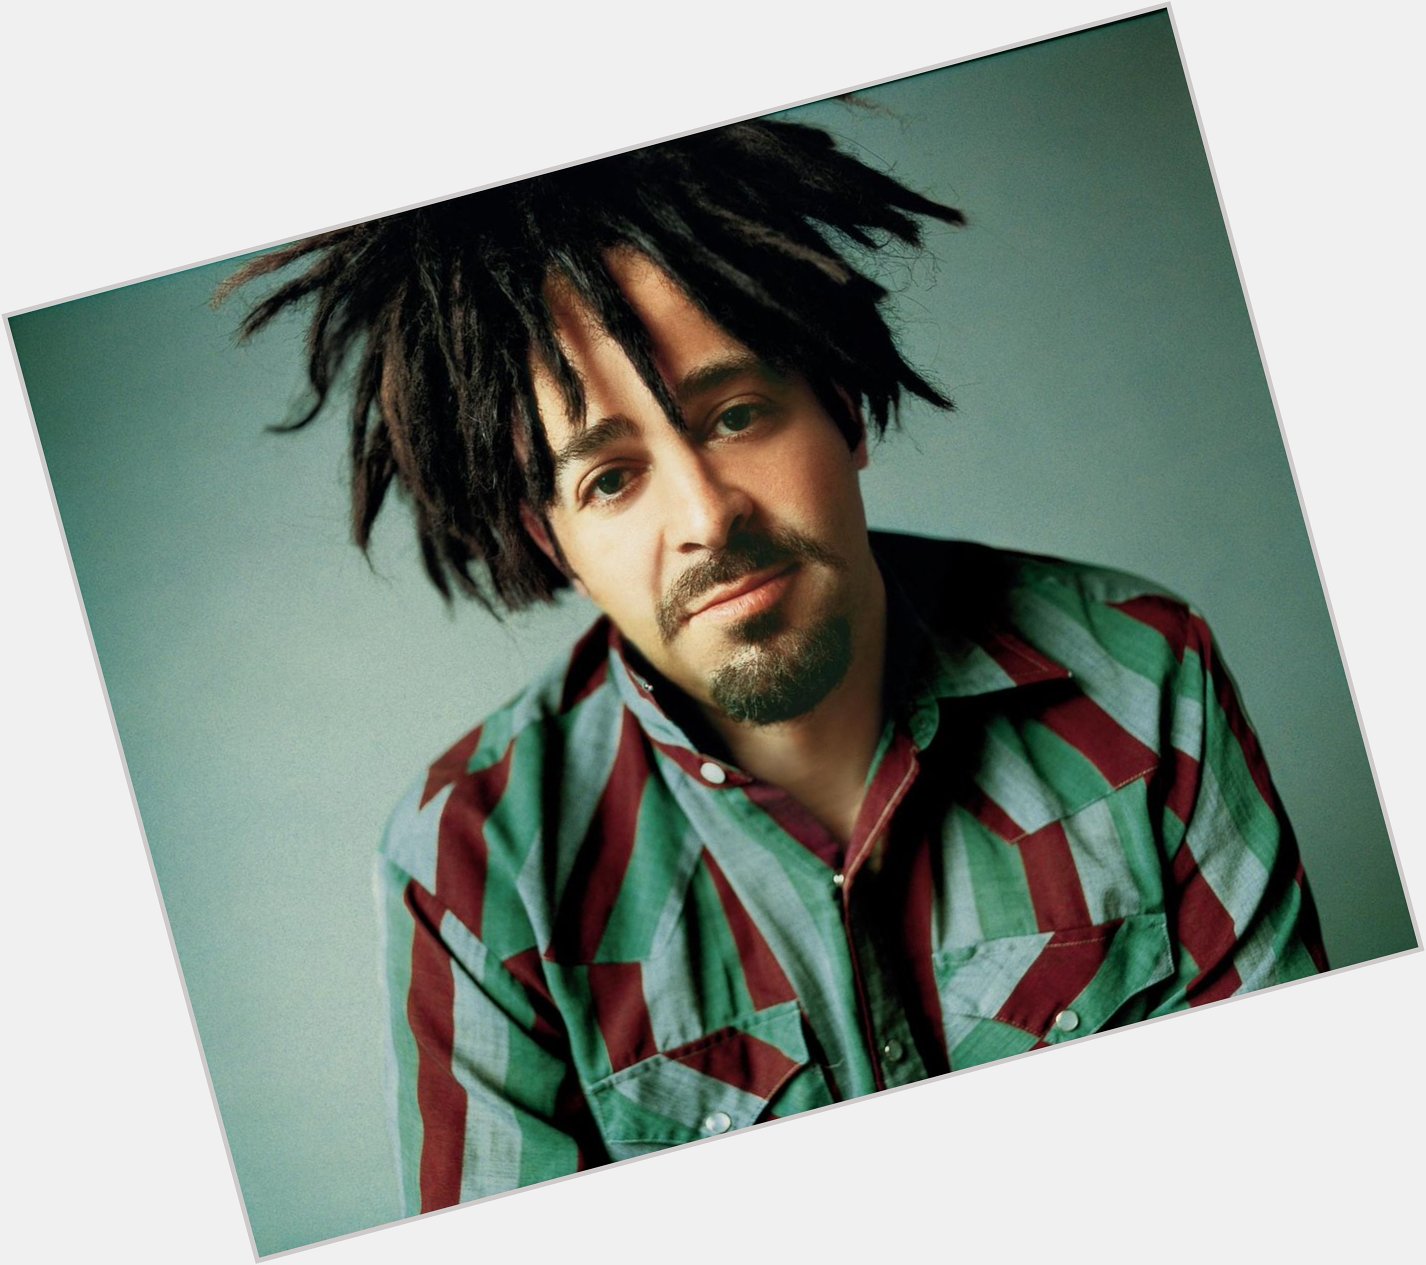 This week\s birthday is Adam Duritz from Counting Crowes, many happy returns! 